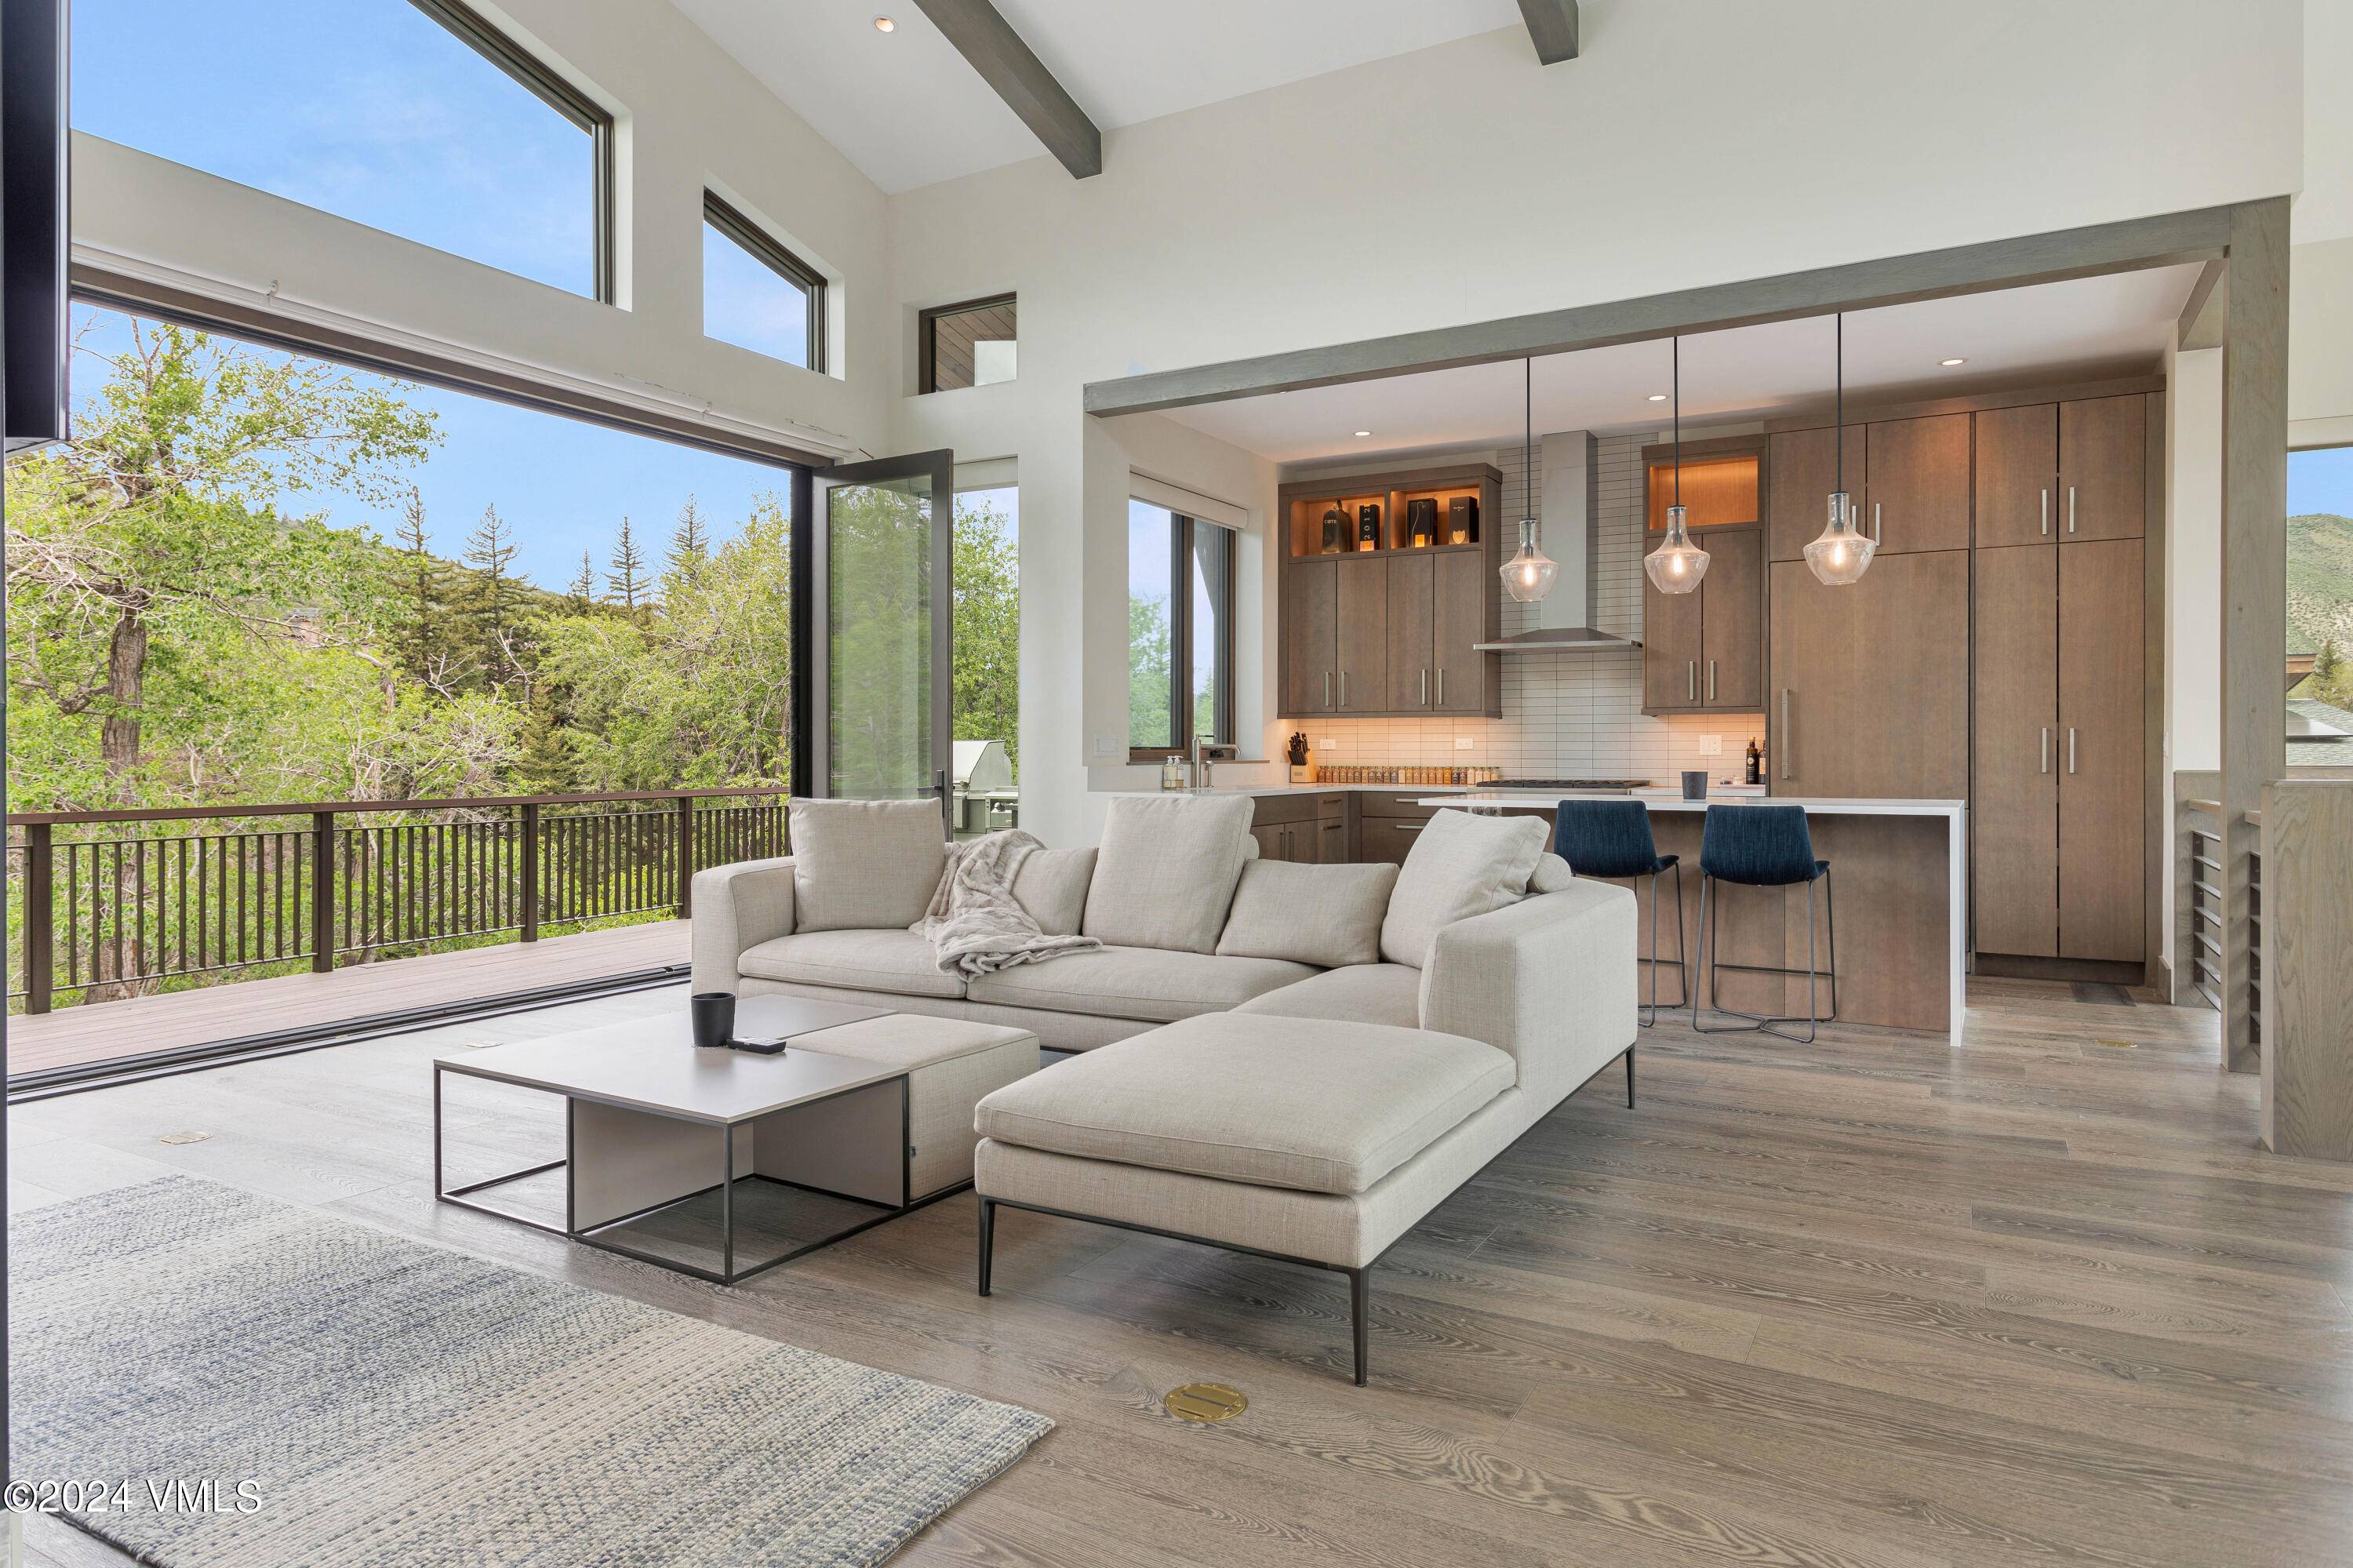 Experience the perfect balance of modern luxury and natural beauty at 358 Riverfront Lane.